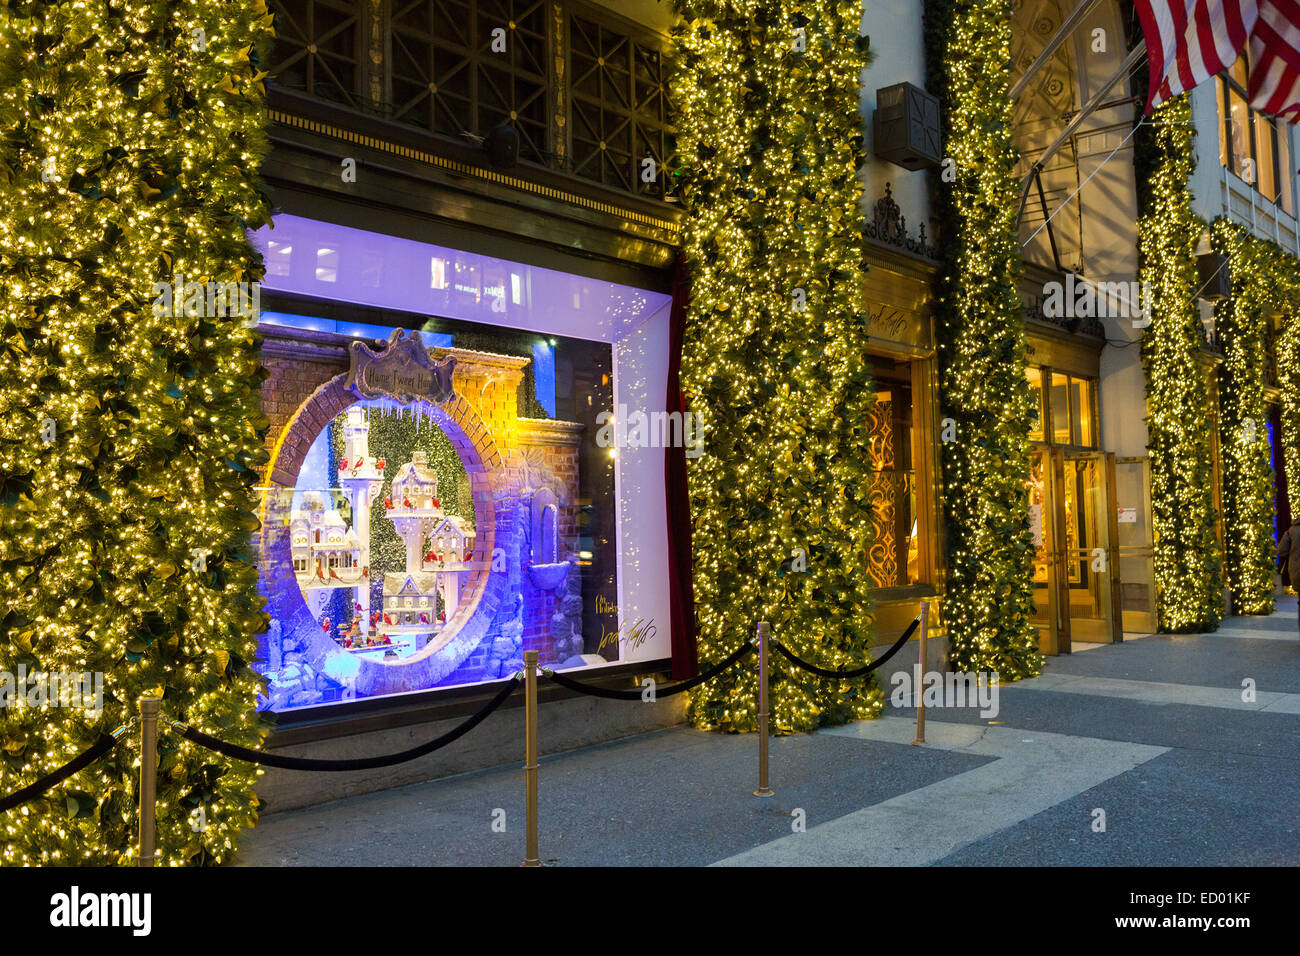 Christmas window holiday display at Lord & Taylor department store along 5th Avenue December 16, 2014 in New York City, NY. Stock Photo